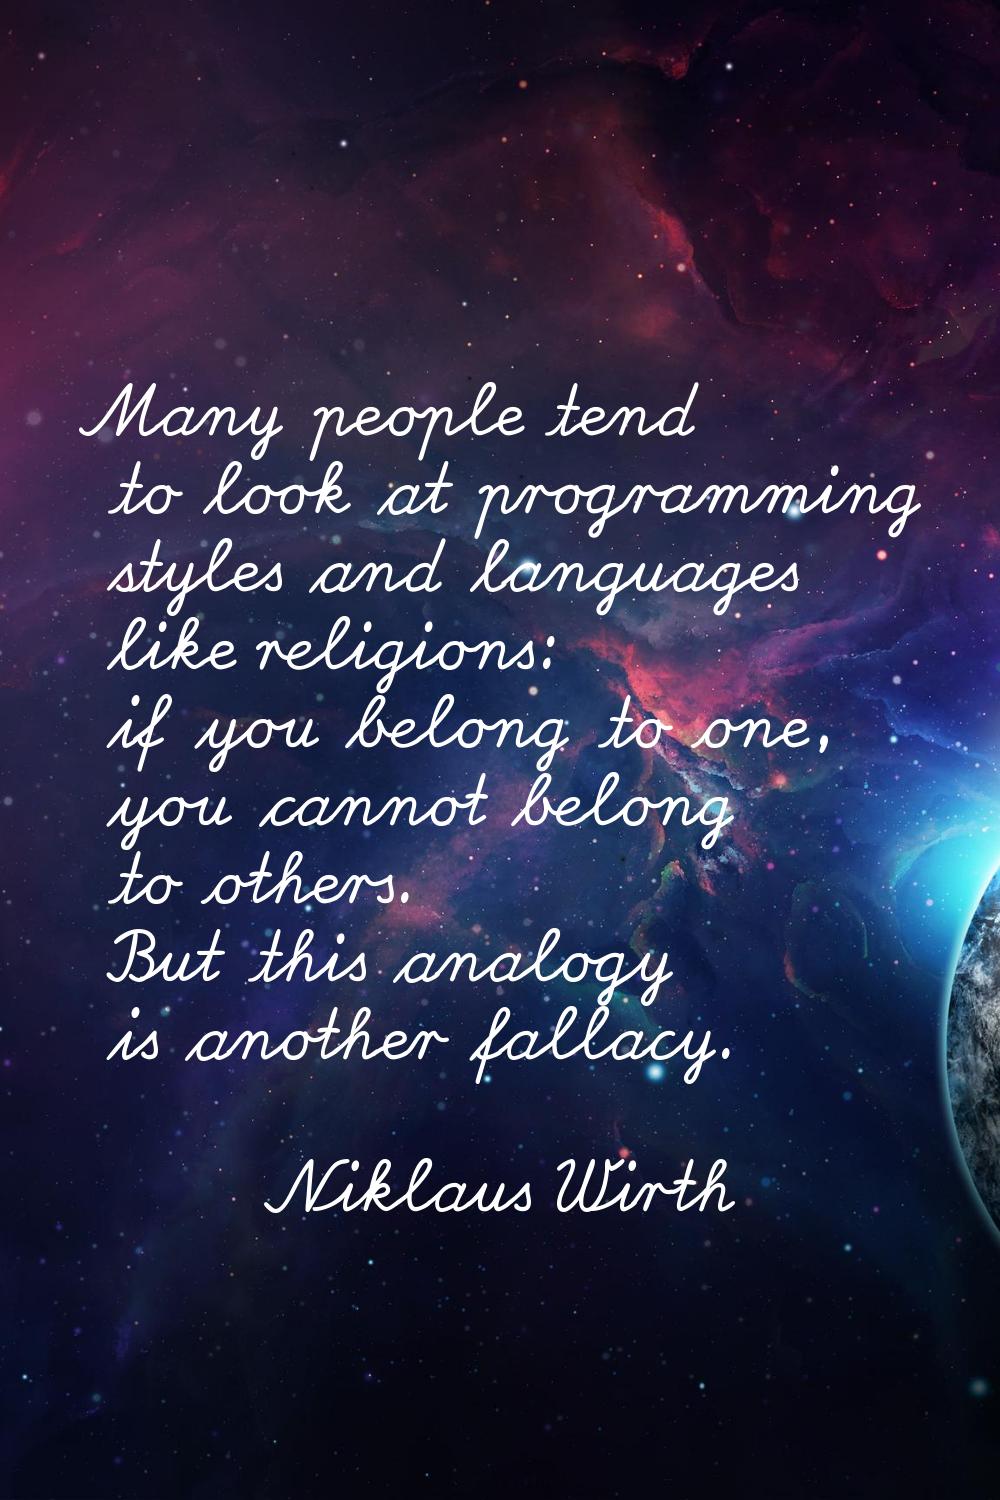 Many people tend to look at programming styles and languages like religions: if you belong to one, 